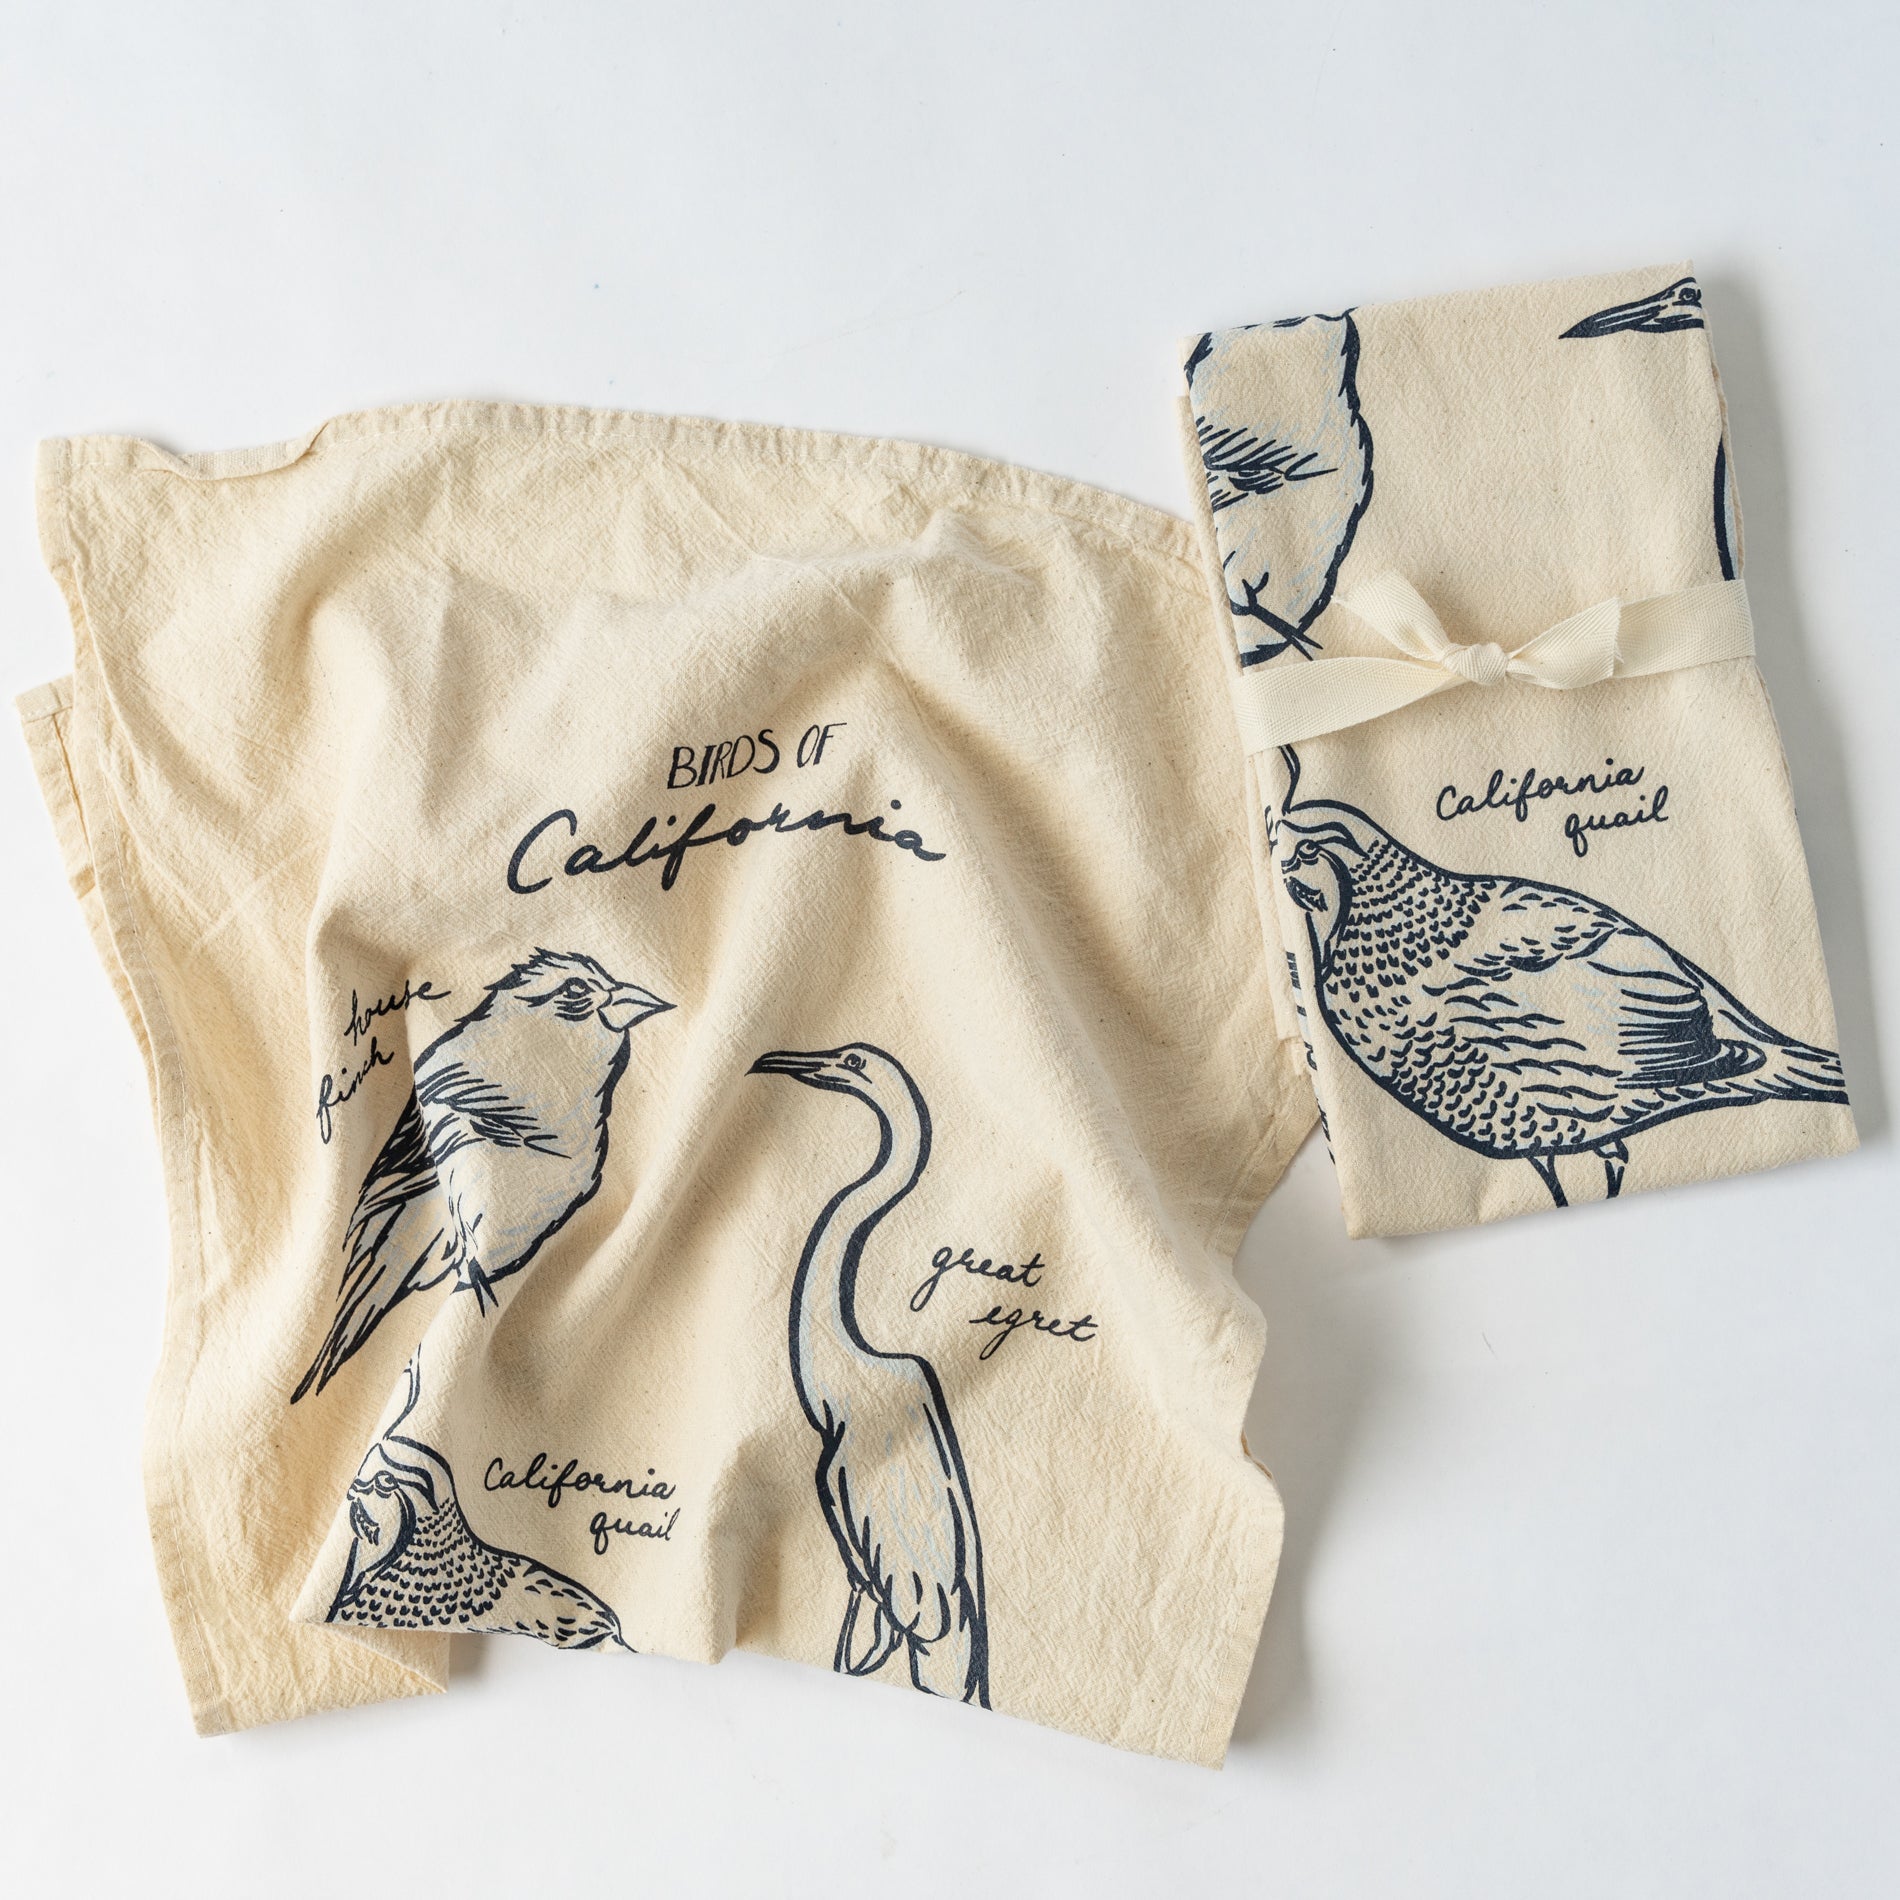 Cream colored towels with illustrations of 5 different birds